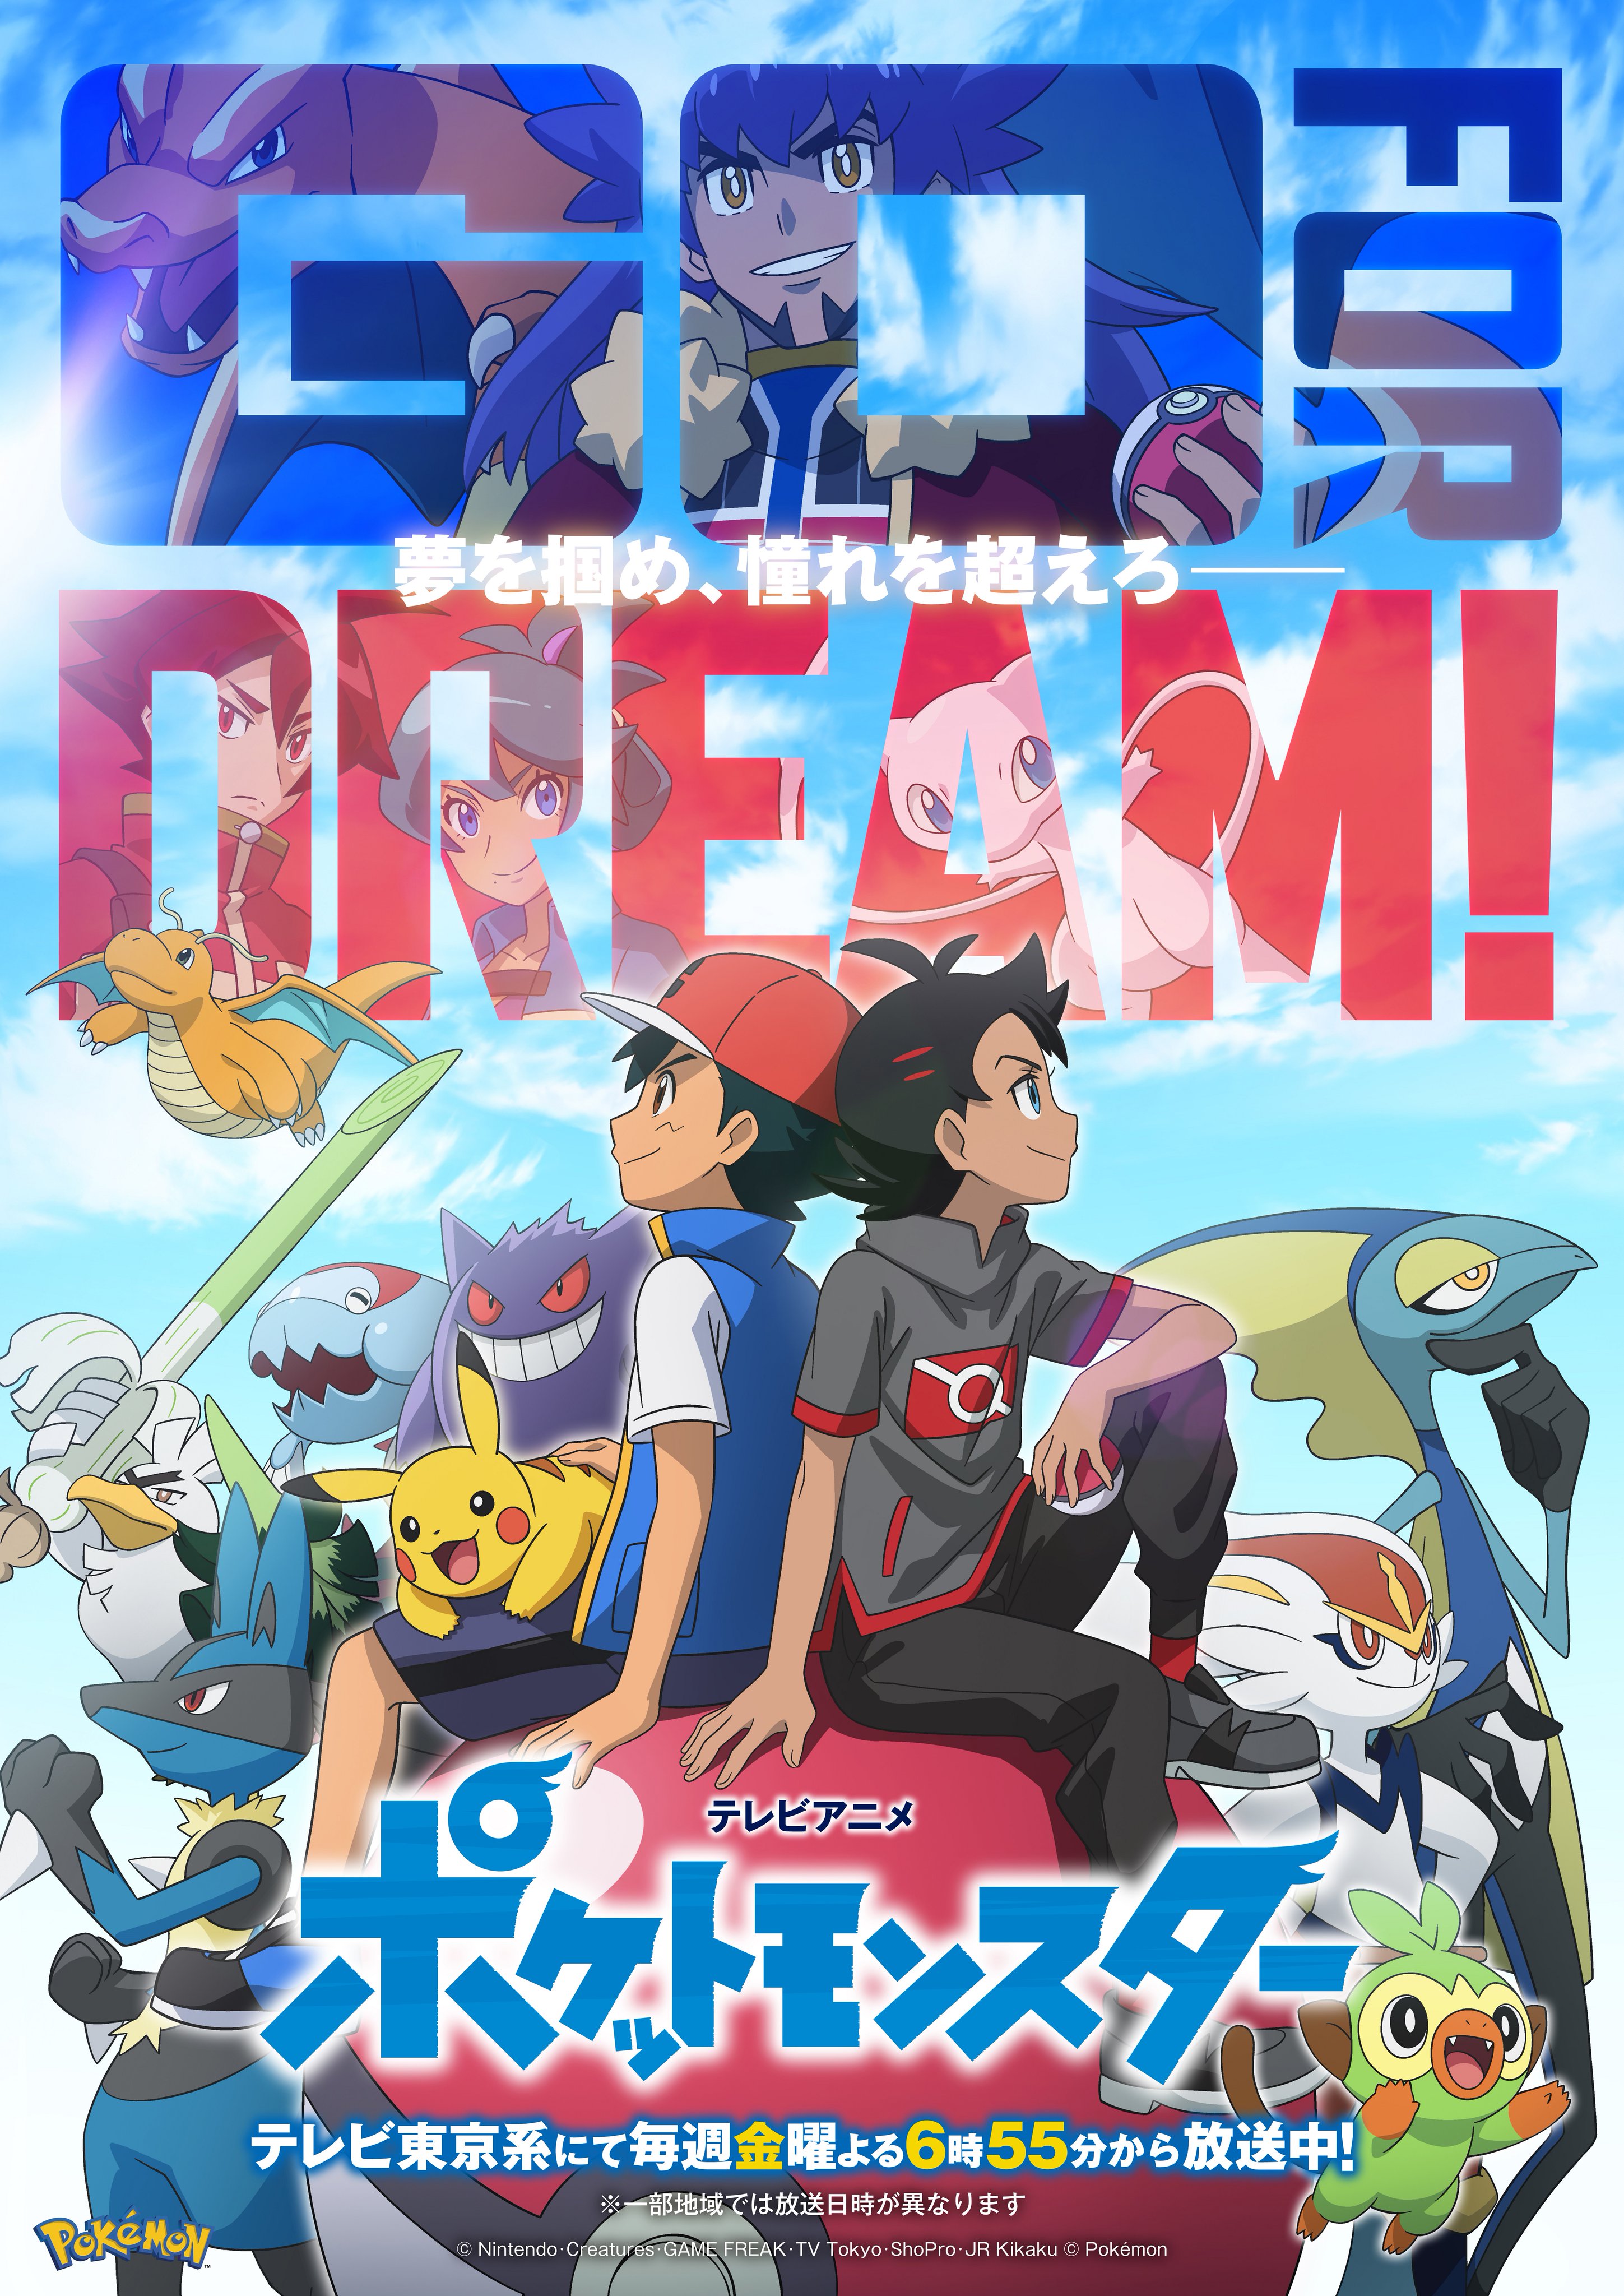 Crunchyroll - Ash is Closer to His Dream Than Ever in Latest Pokémon Anime  Trailer and Visual